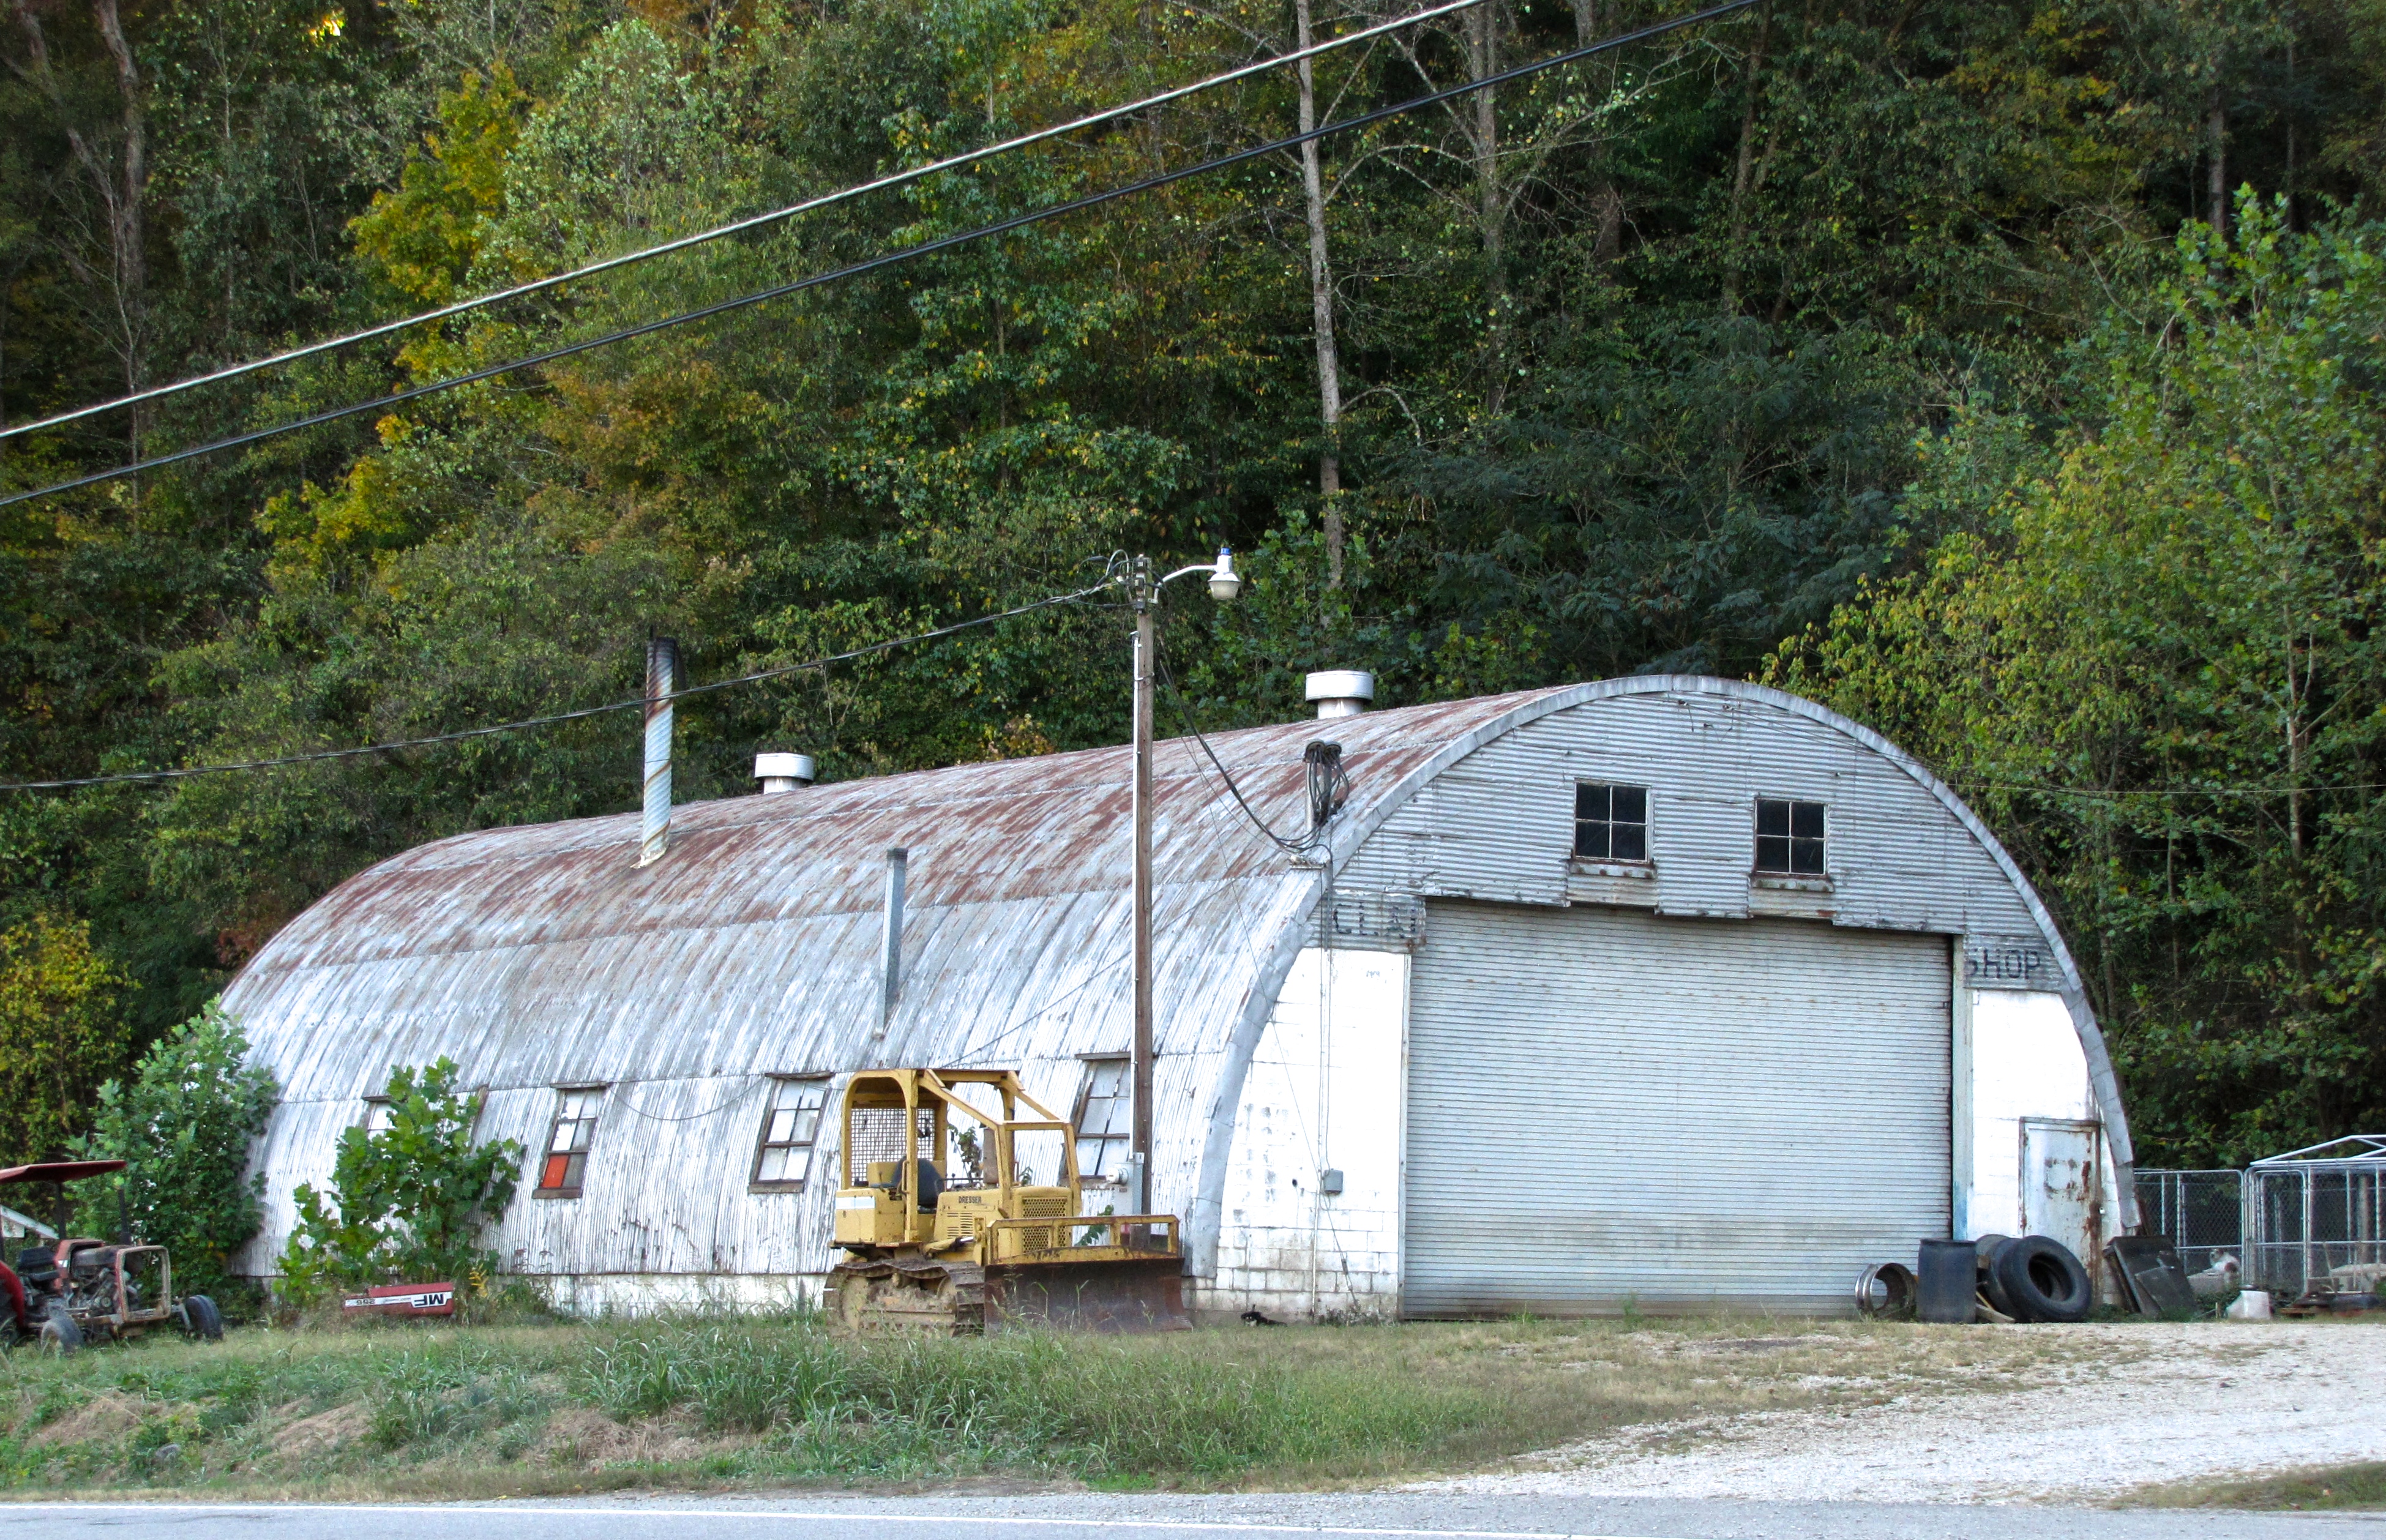 quonset hut in New Canaan, CT